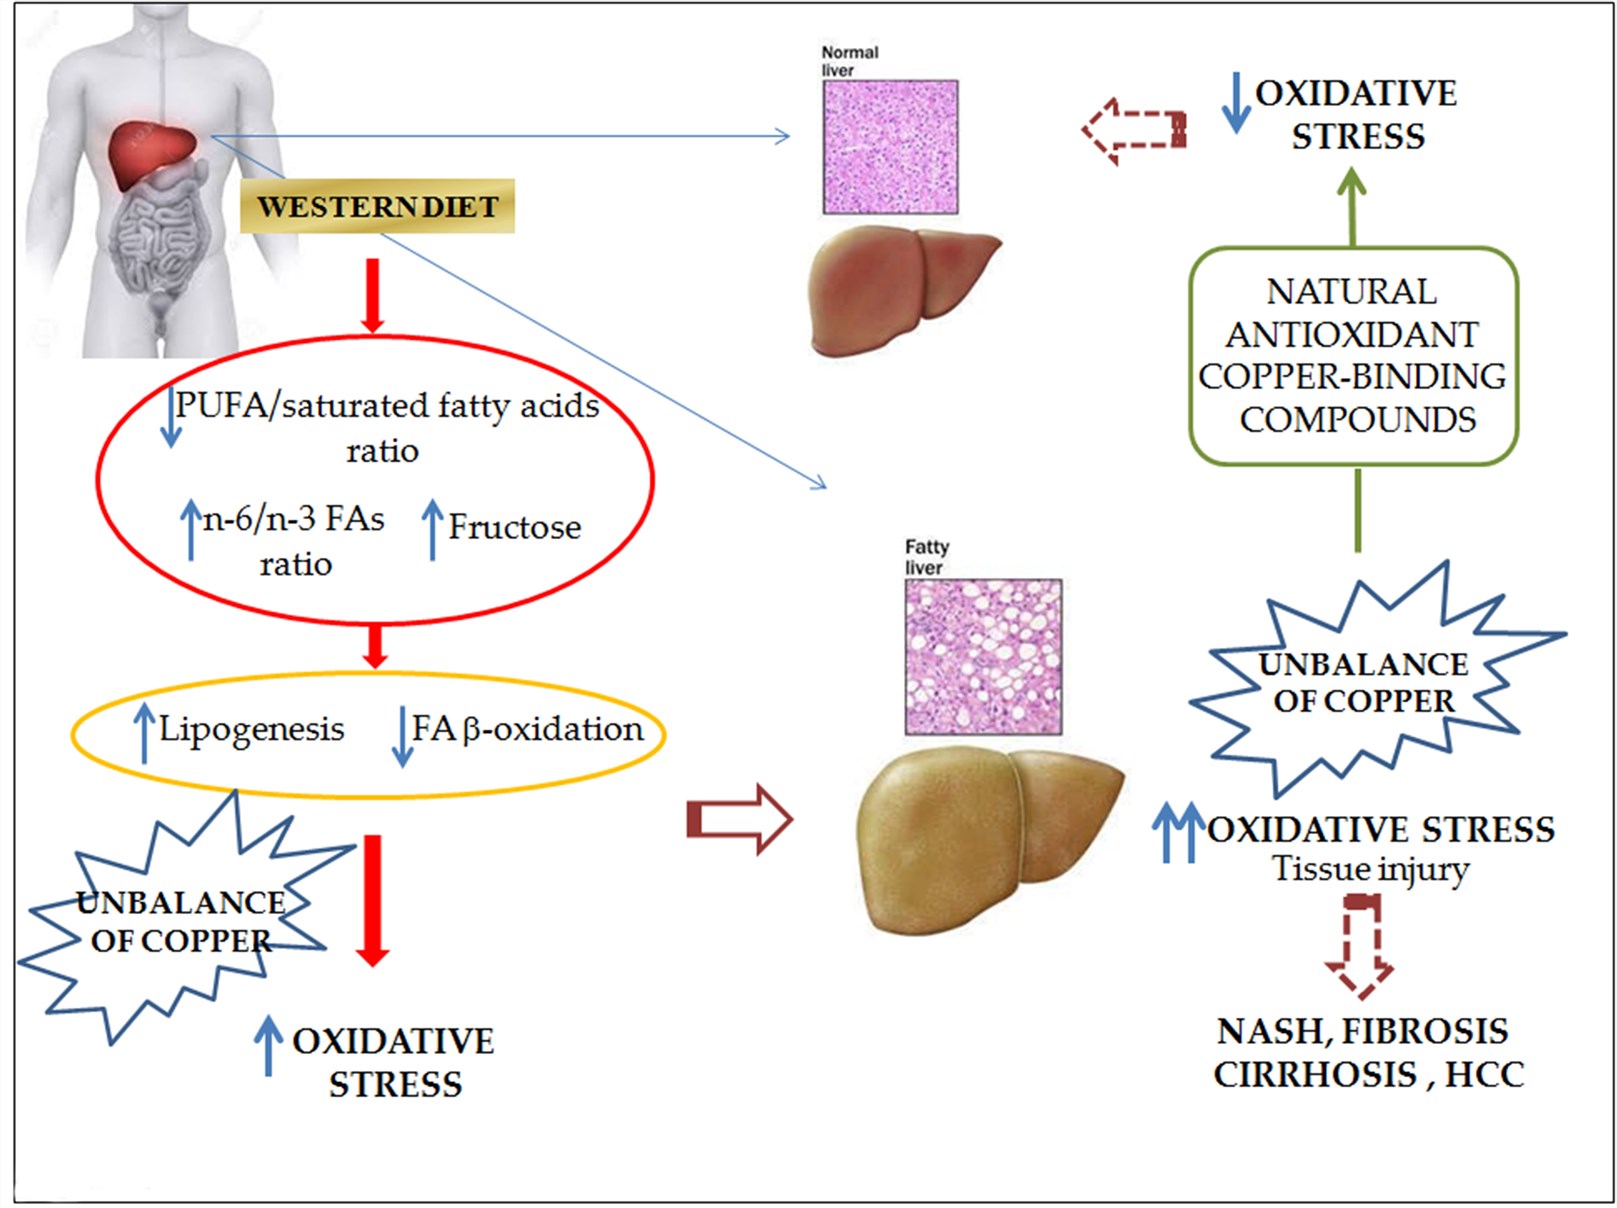 Summary of the main information on the onset and progression of NAFLD linked to diet.